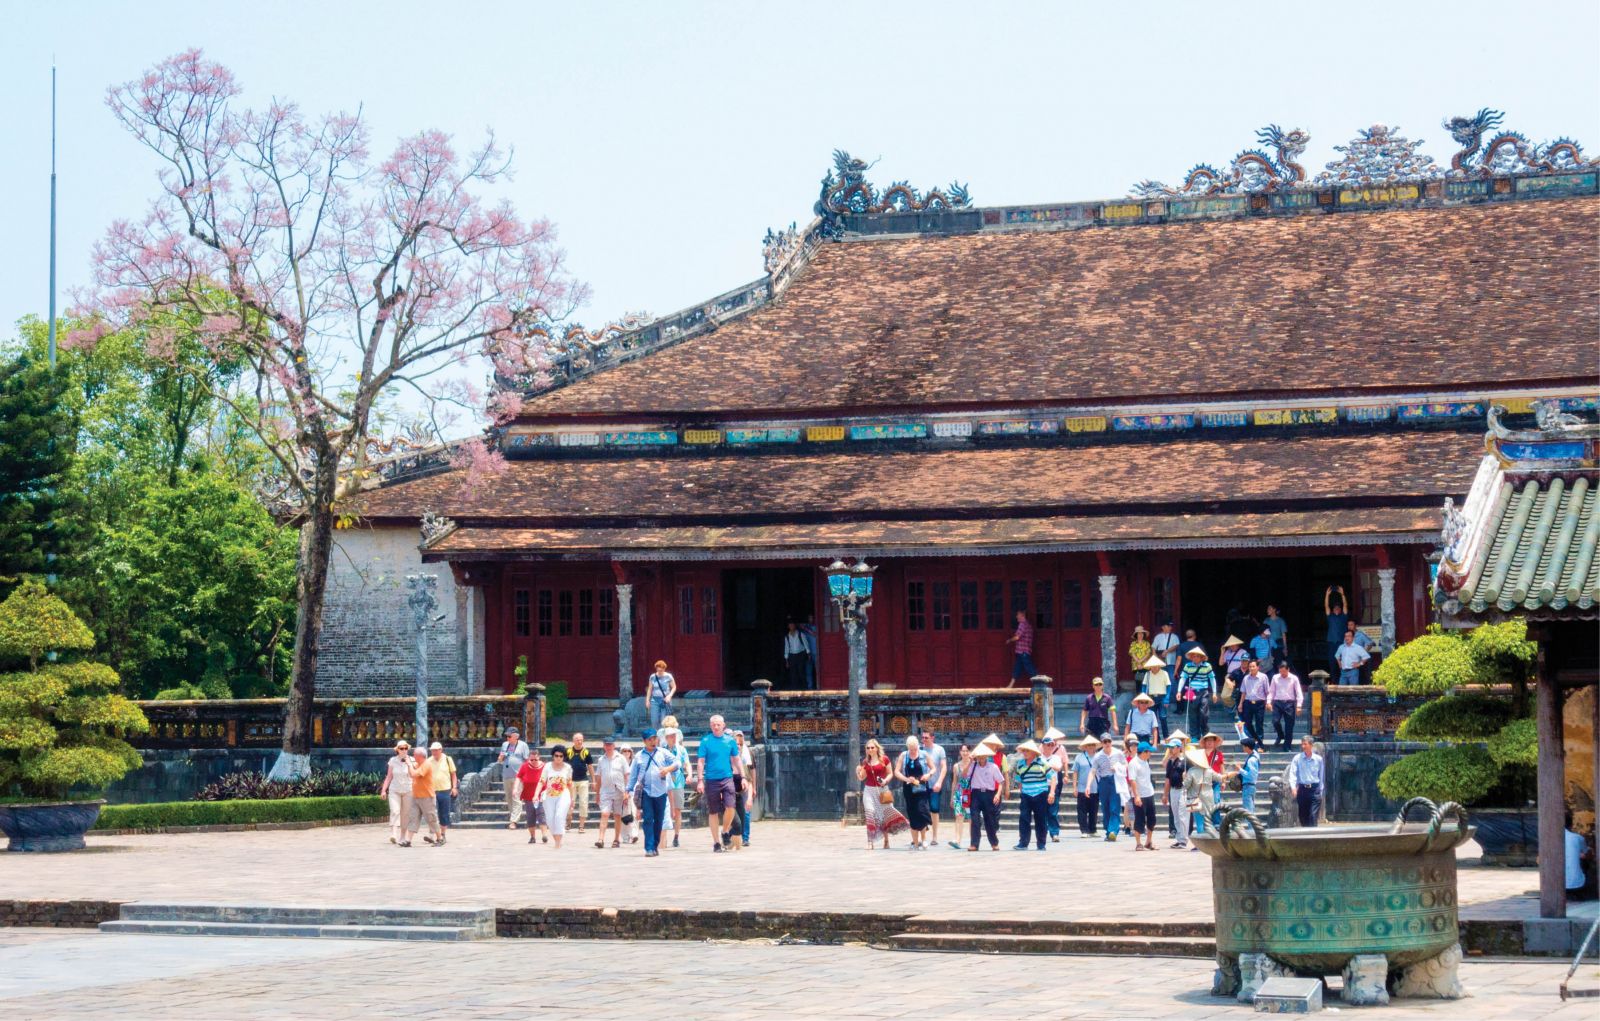 Tourists visiting the Imperial Citadel in the season of blooming Parasol Flowers